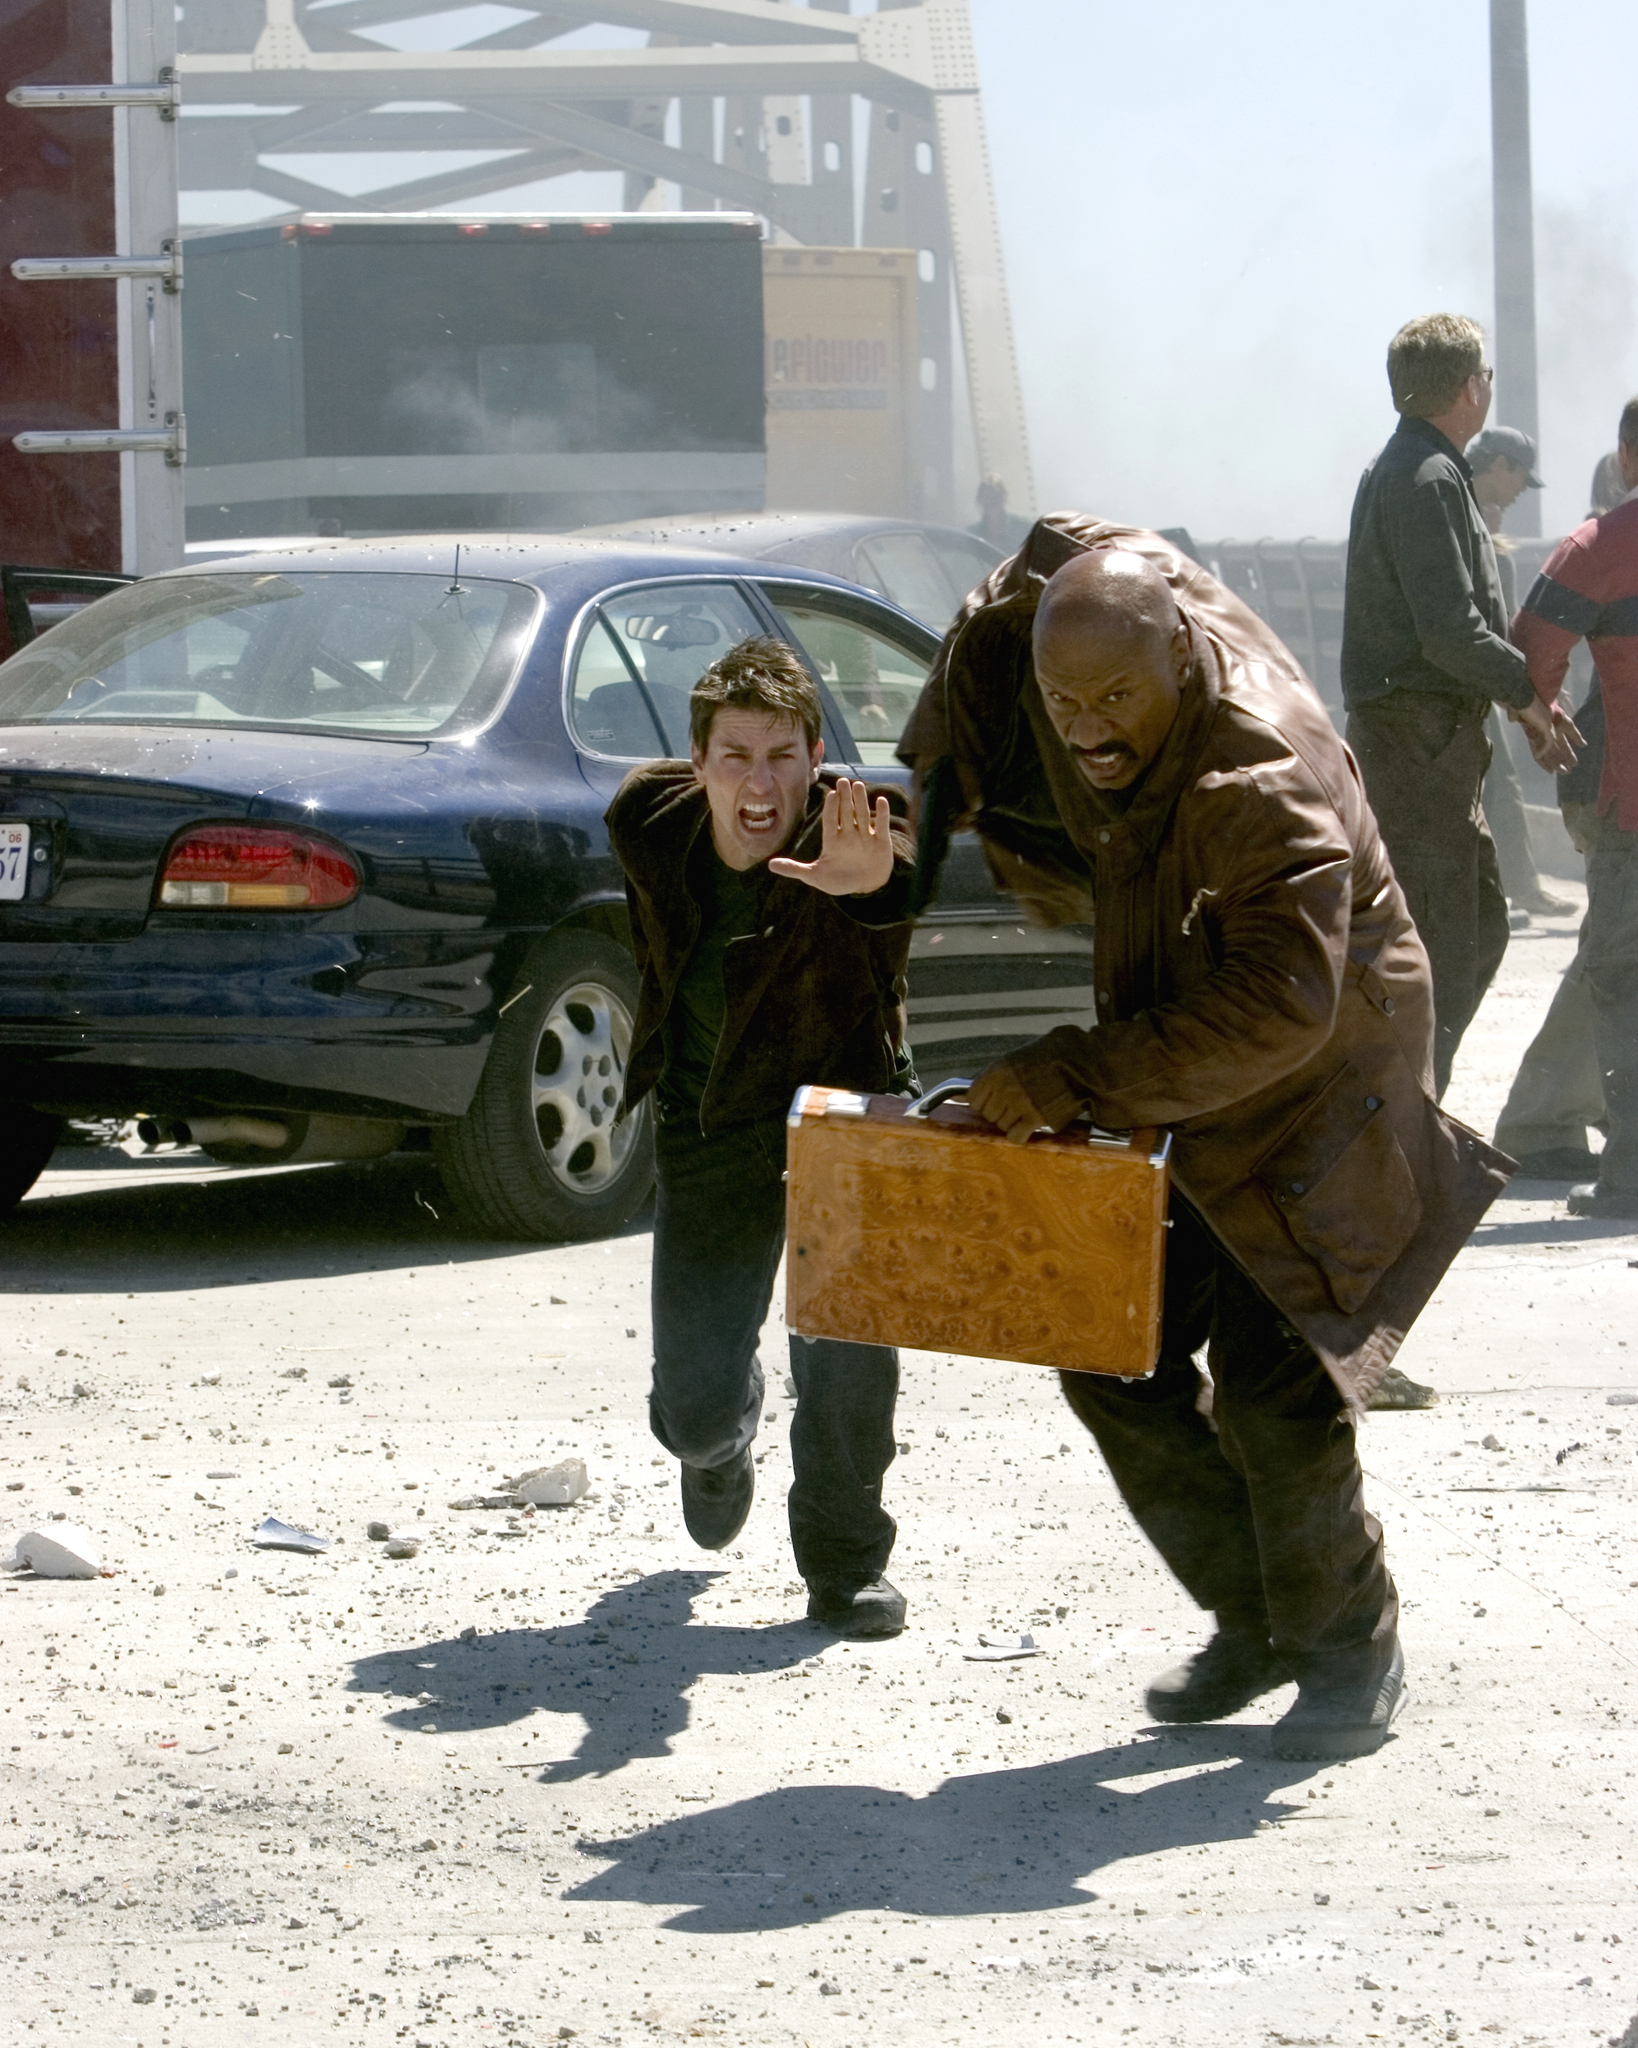 Still of Tom Cruise and Ving Rhames in Mission: Impossible III (2006)